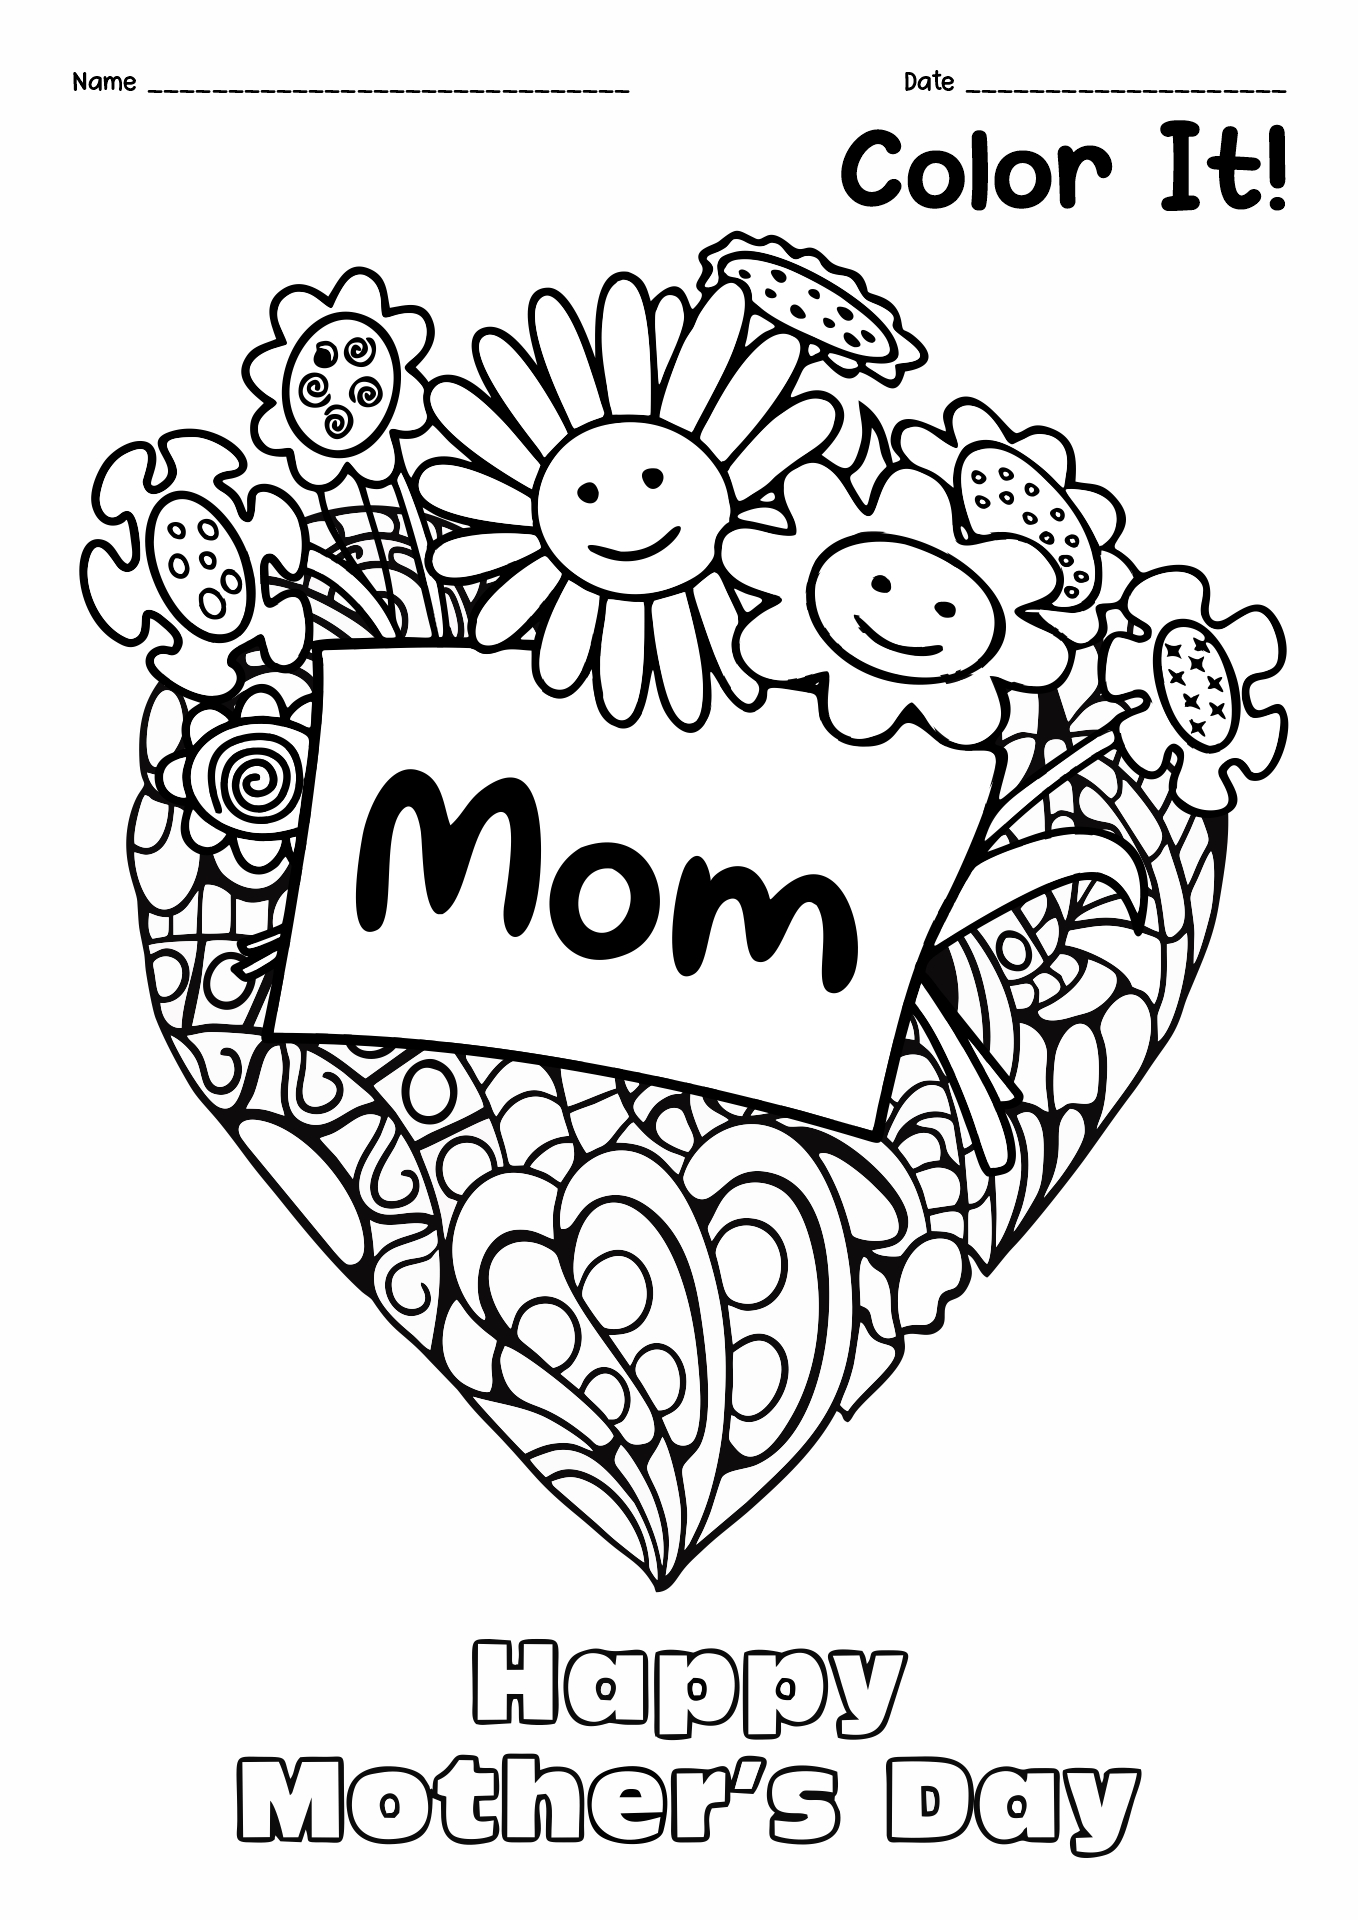 Printable Mothers Day Coloring Pages Image